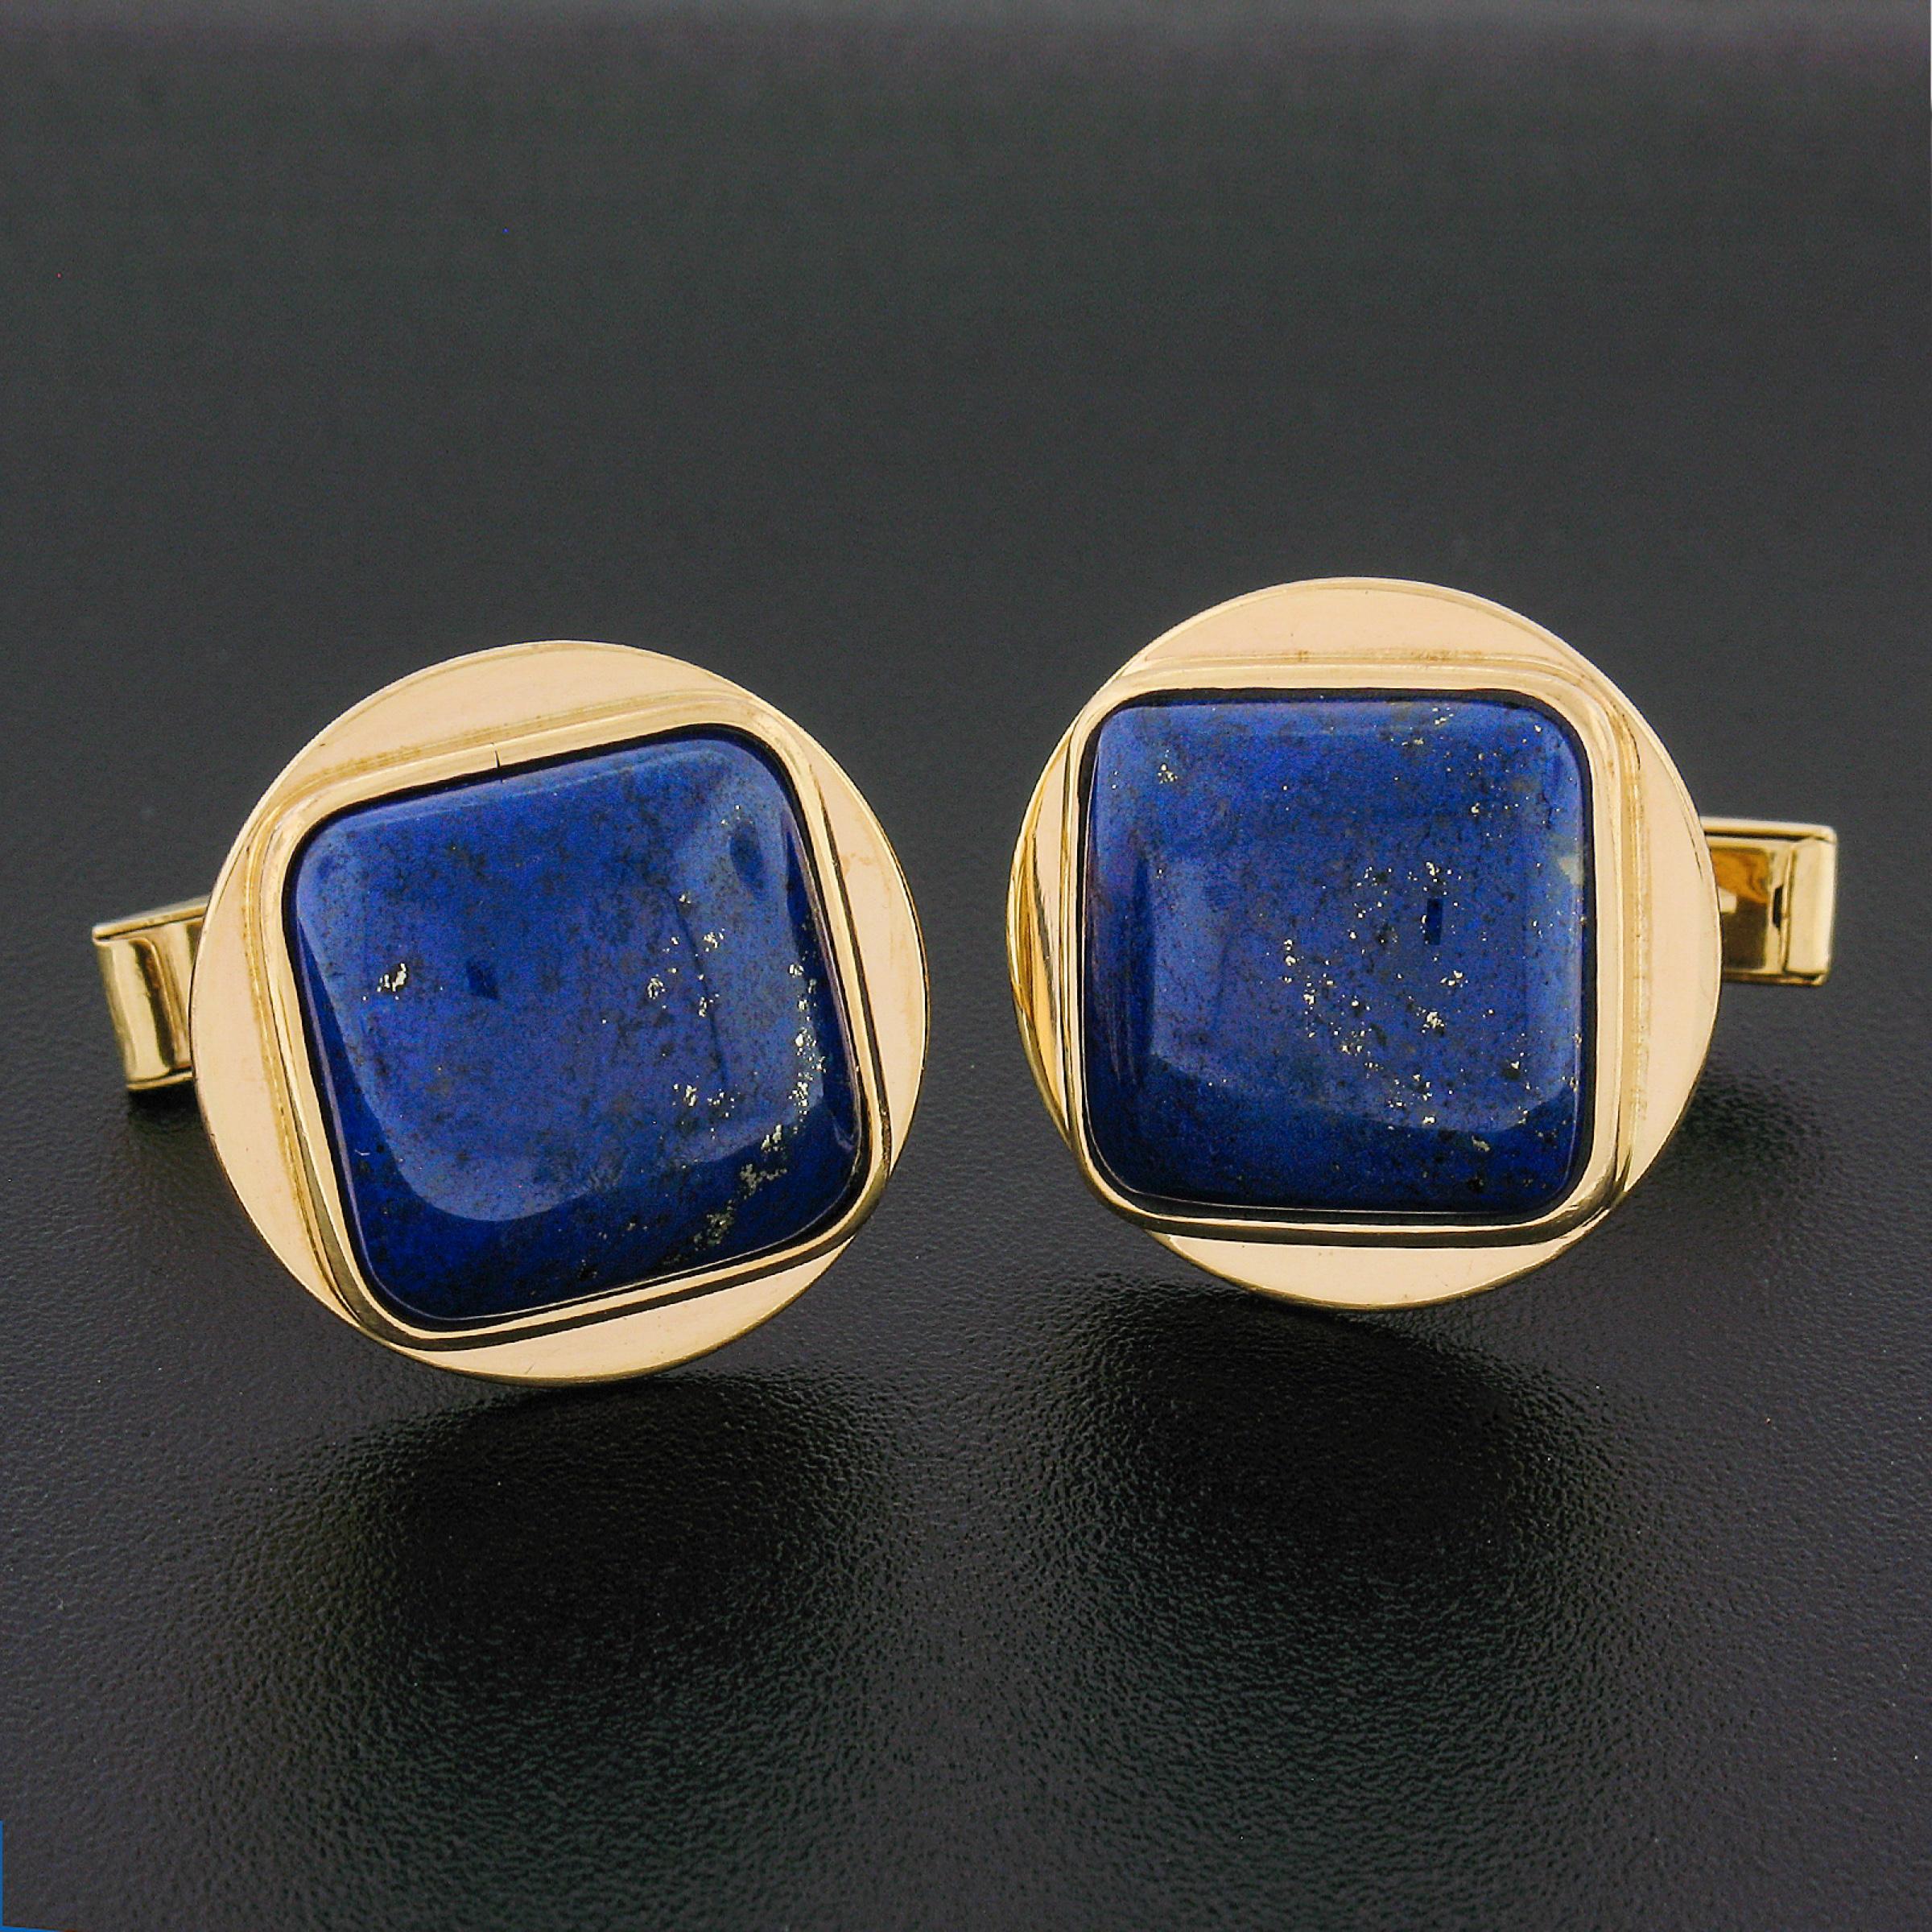 This vintage pair of cuff links was crafted in solid 14k yellow gold. The cuff links feature 2 cushion cabochon cut blue Lapis stones. The lapis are bezel set onto the round shaped panel. The cuff links have polished finish and swivel backings that